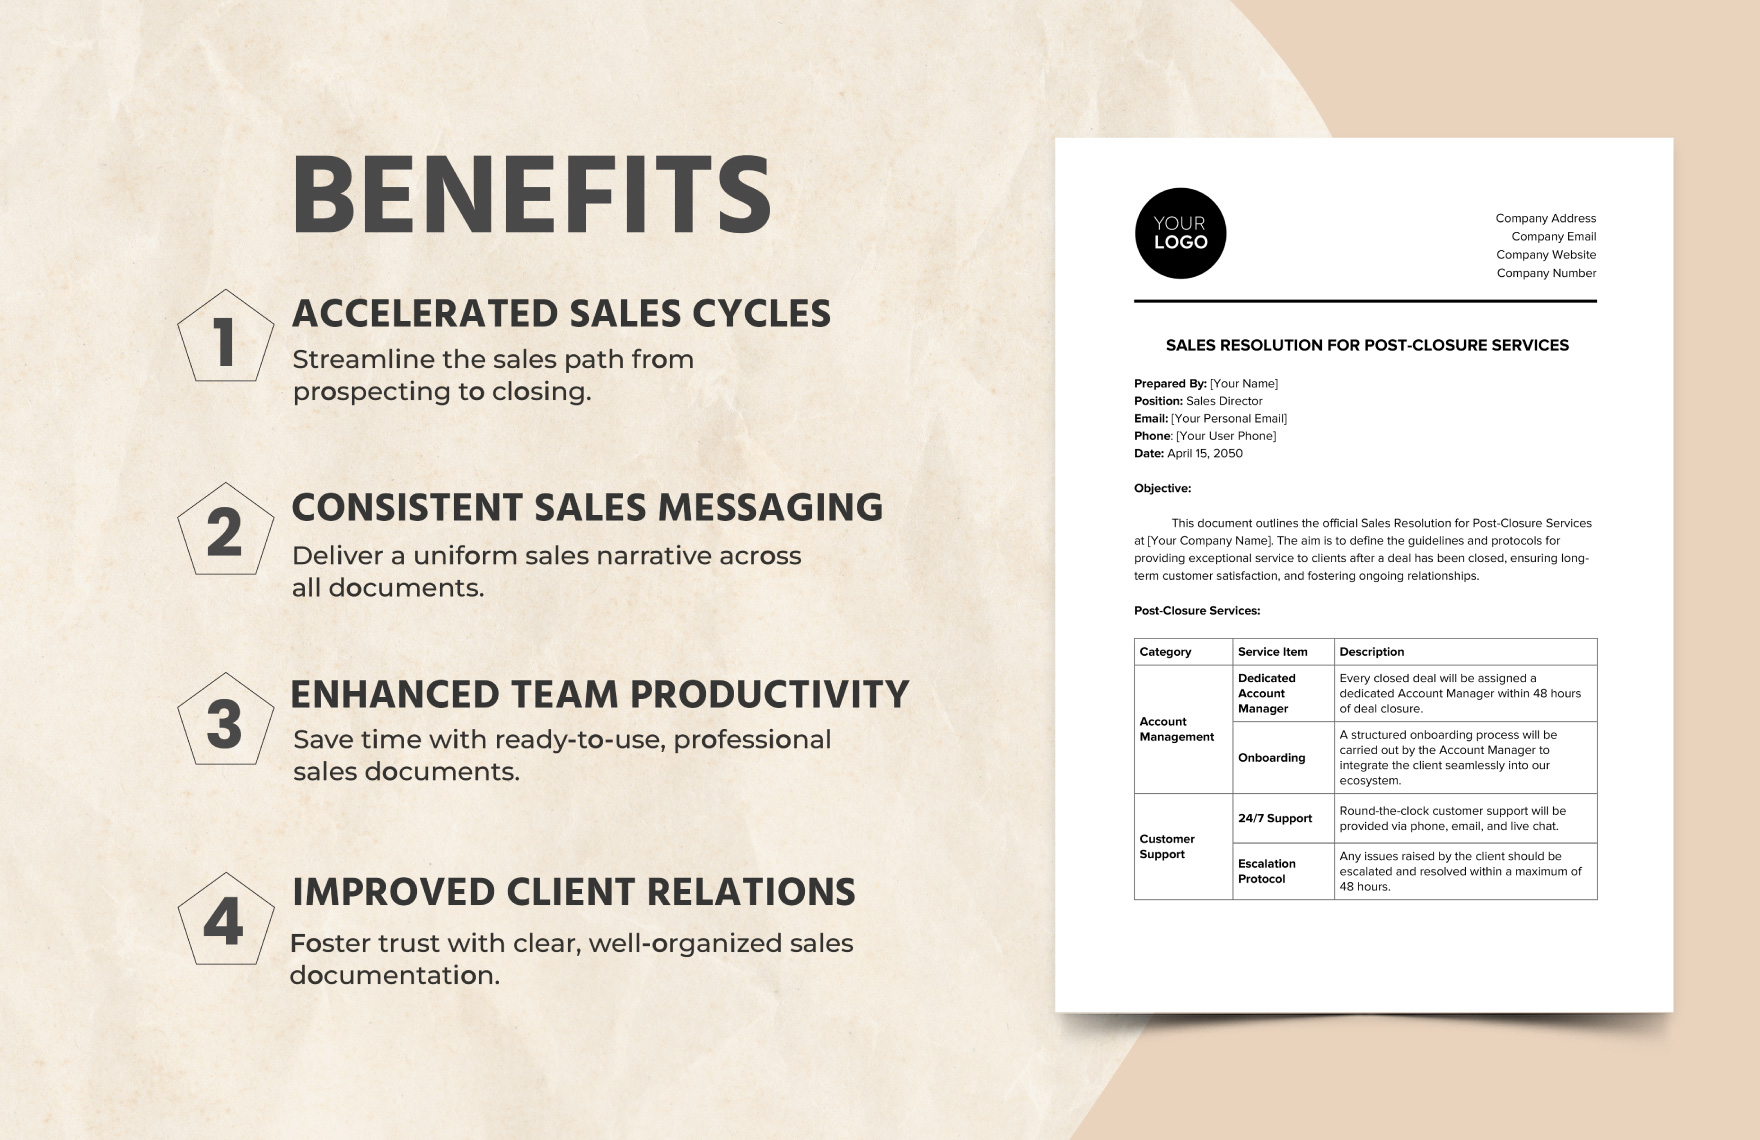 Sales Resolution for Post-Closure Services Template